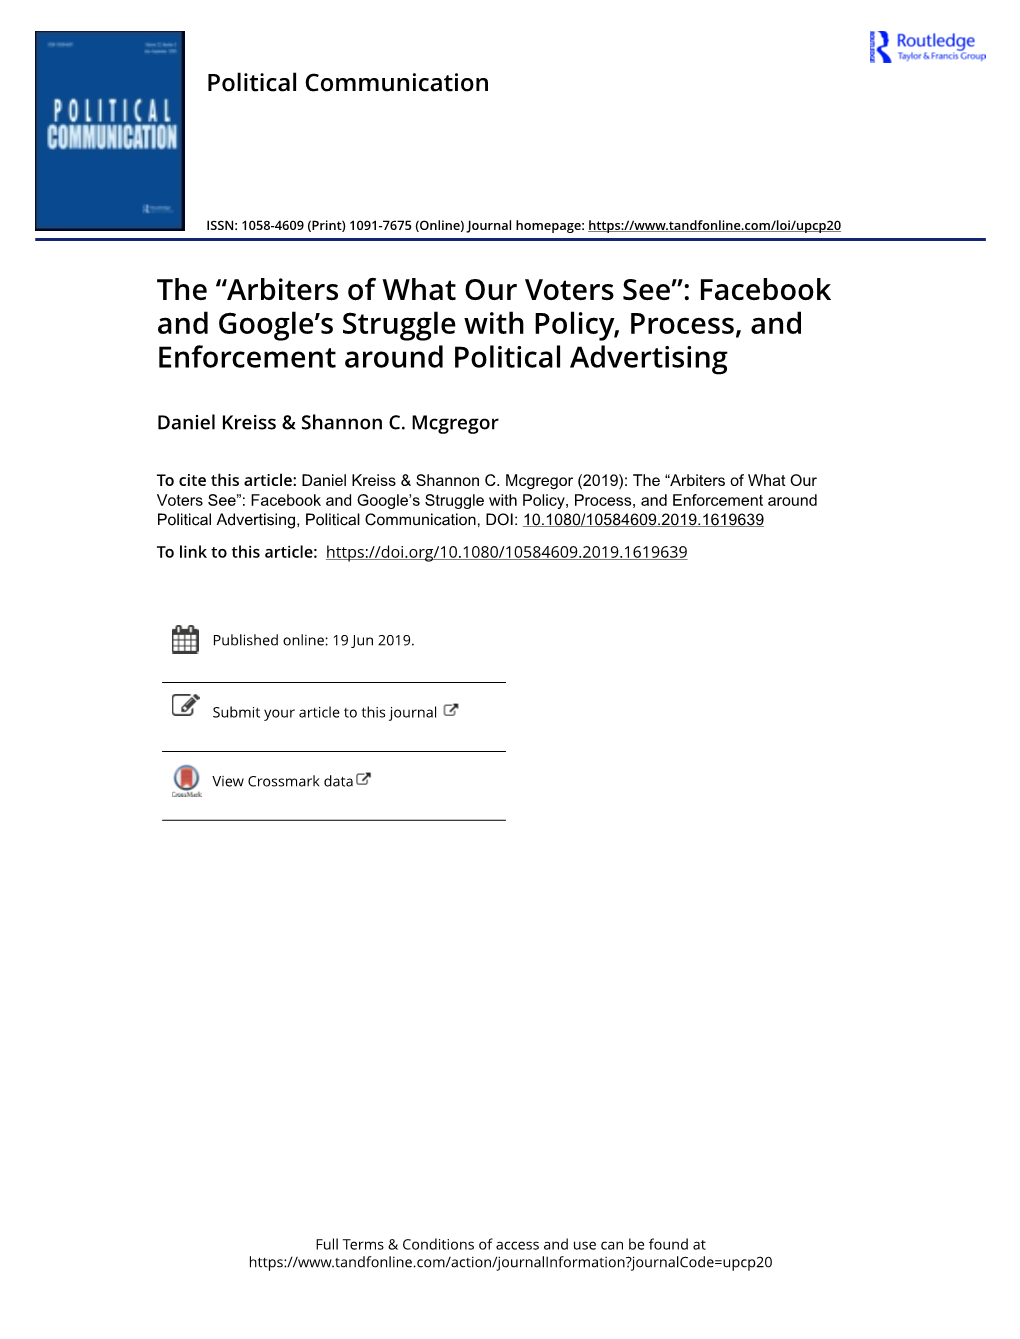 The Arbiters of What Our Voters See Facebook and Google S Struggle with Policy Process